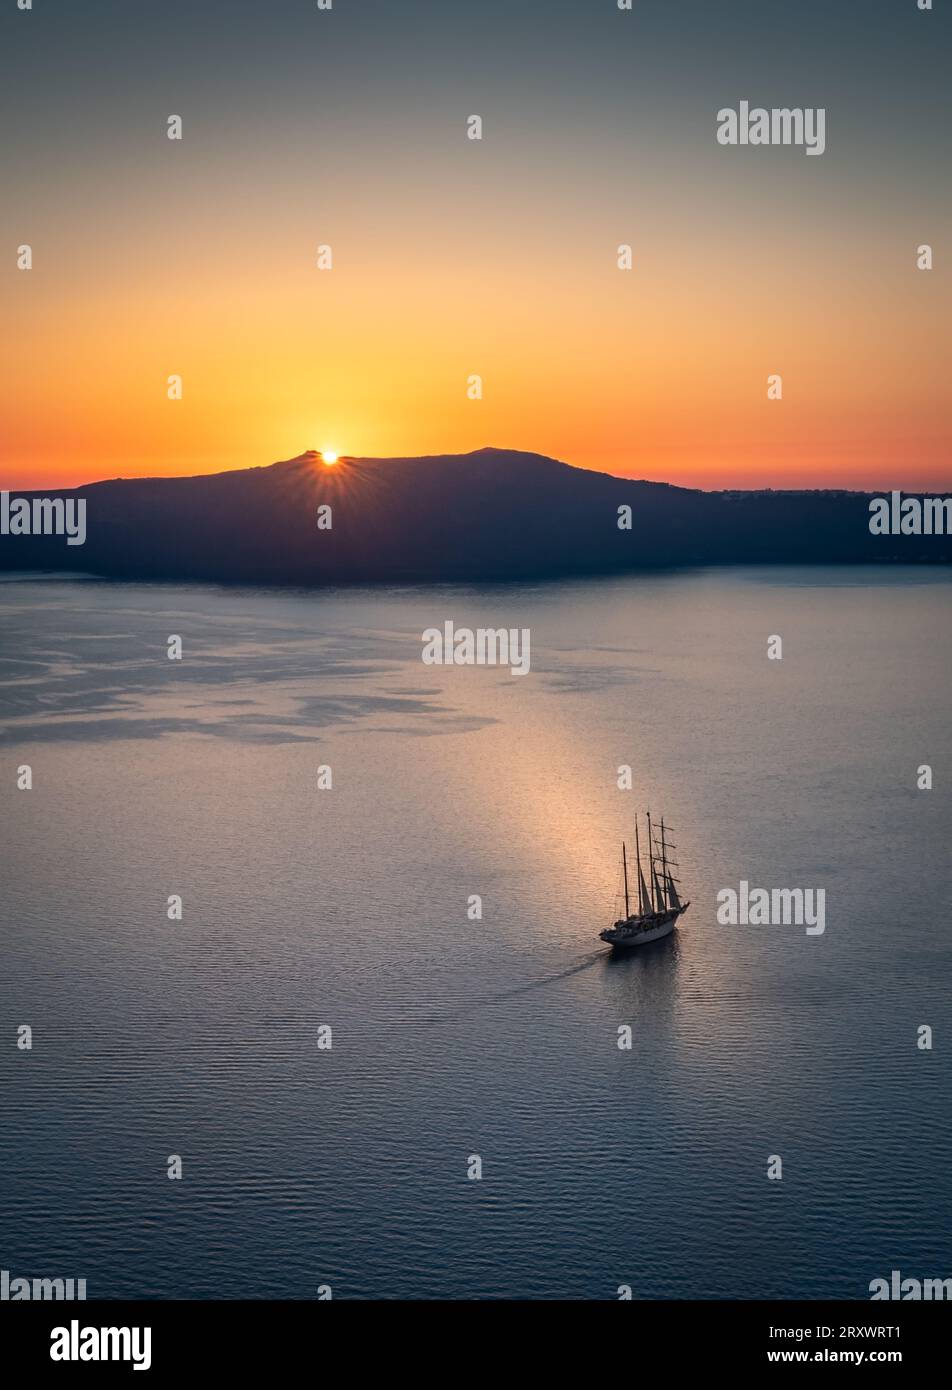 The bay off Thera, Santorini with sun just setting behind the island of Thirasia, golden clear sky and masted sailing ship in middle of bay Stock Photo